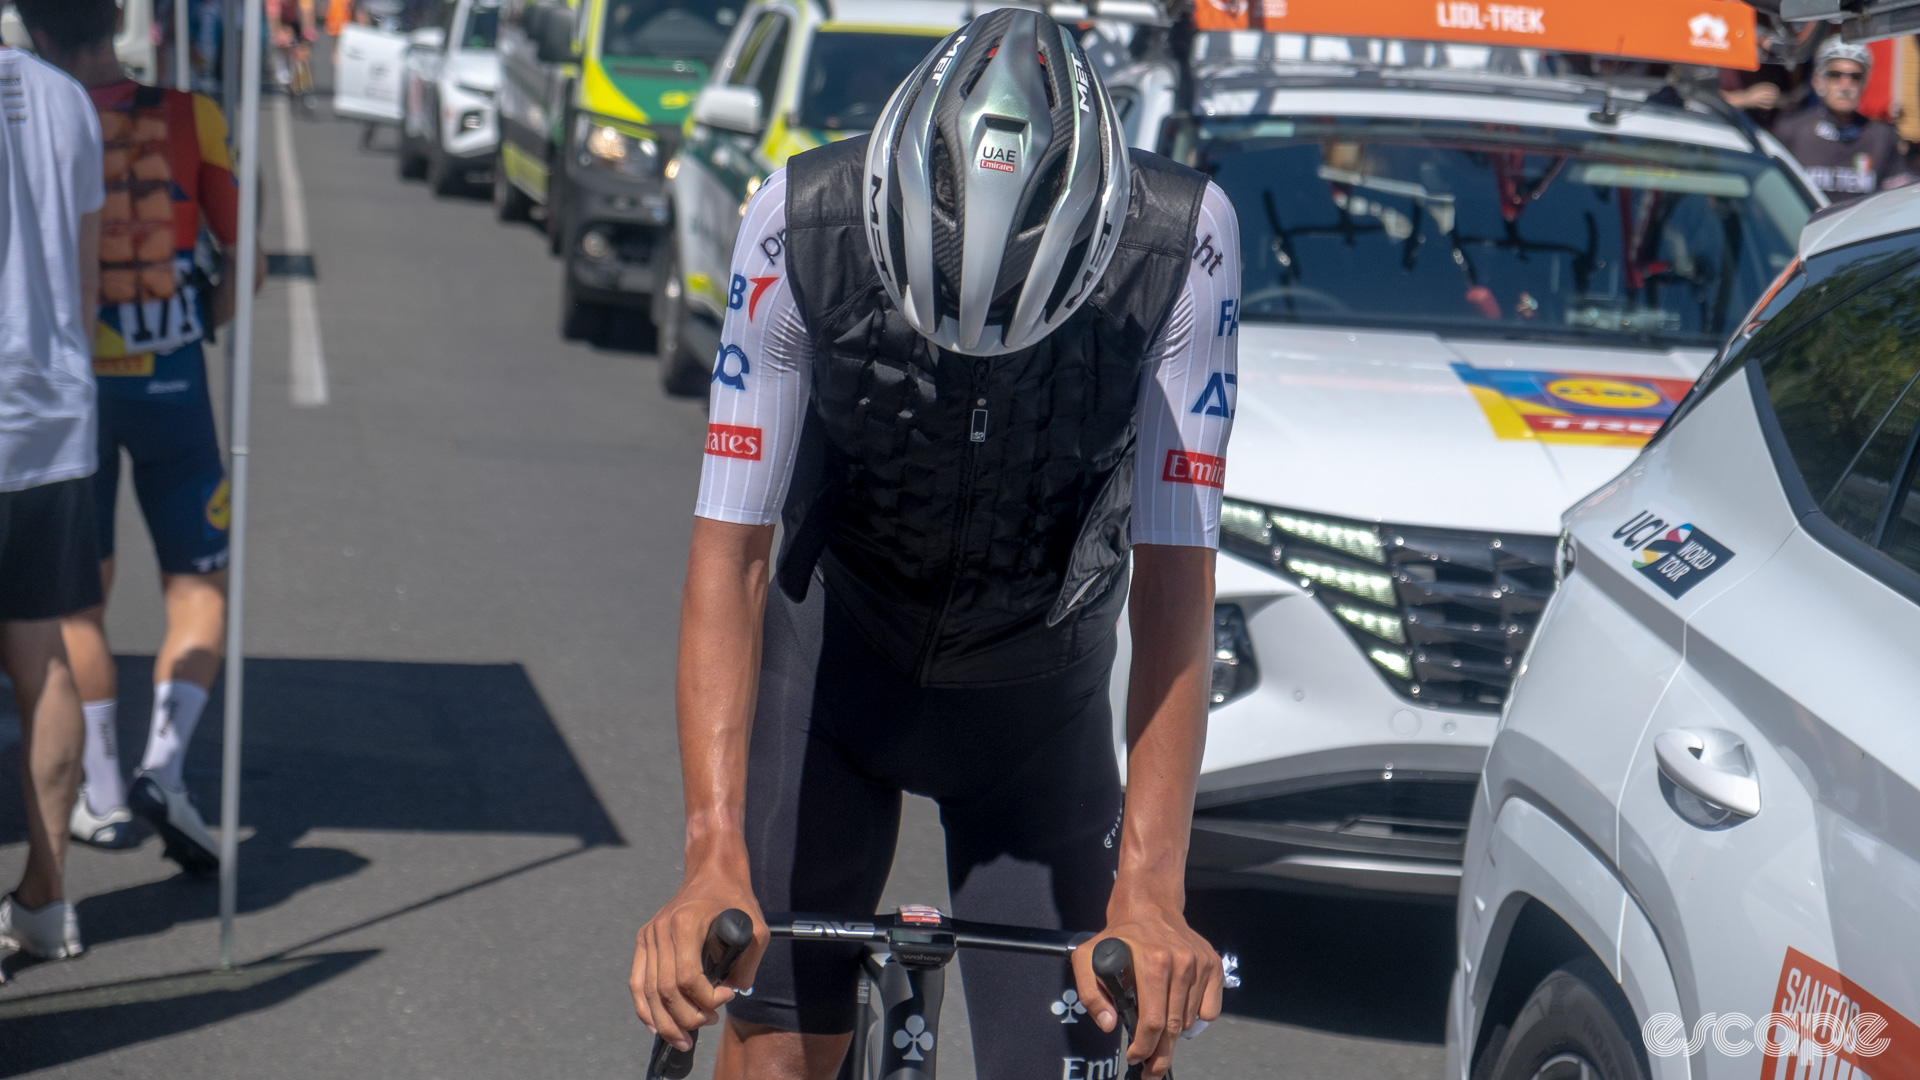 The photo shows a Isaac Del Toro of UAE Team Emirates wearing a black ice vest. 